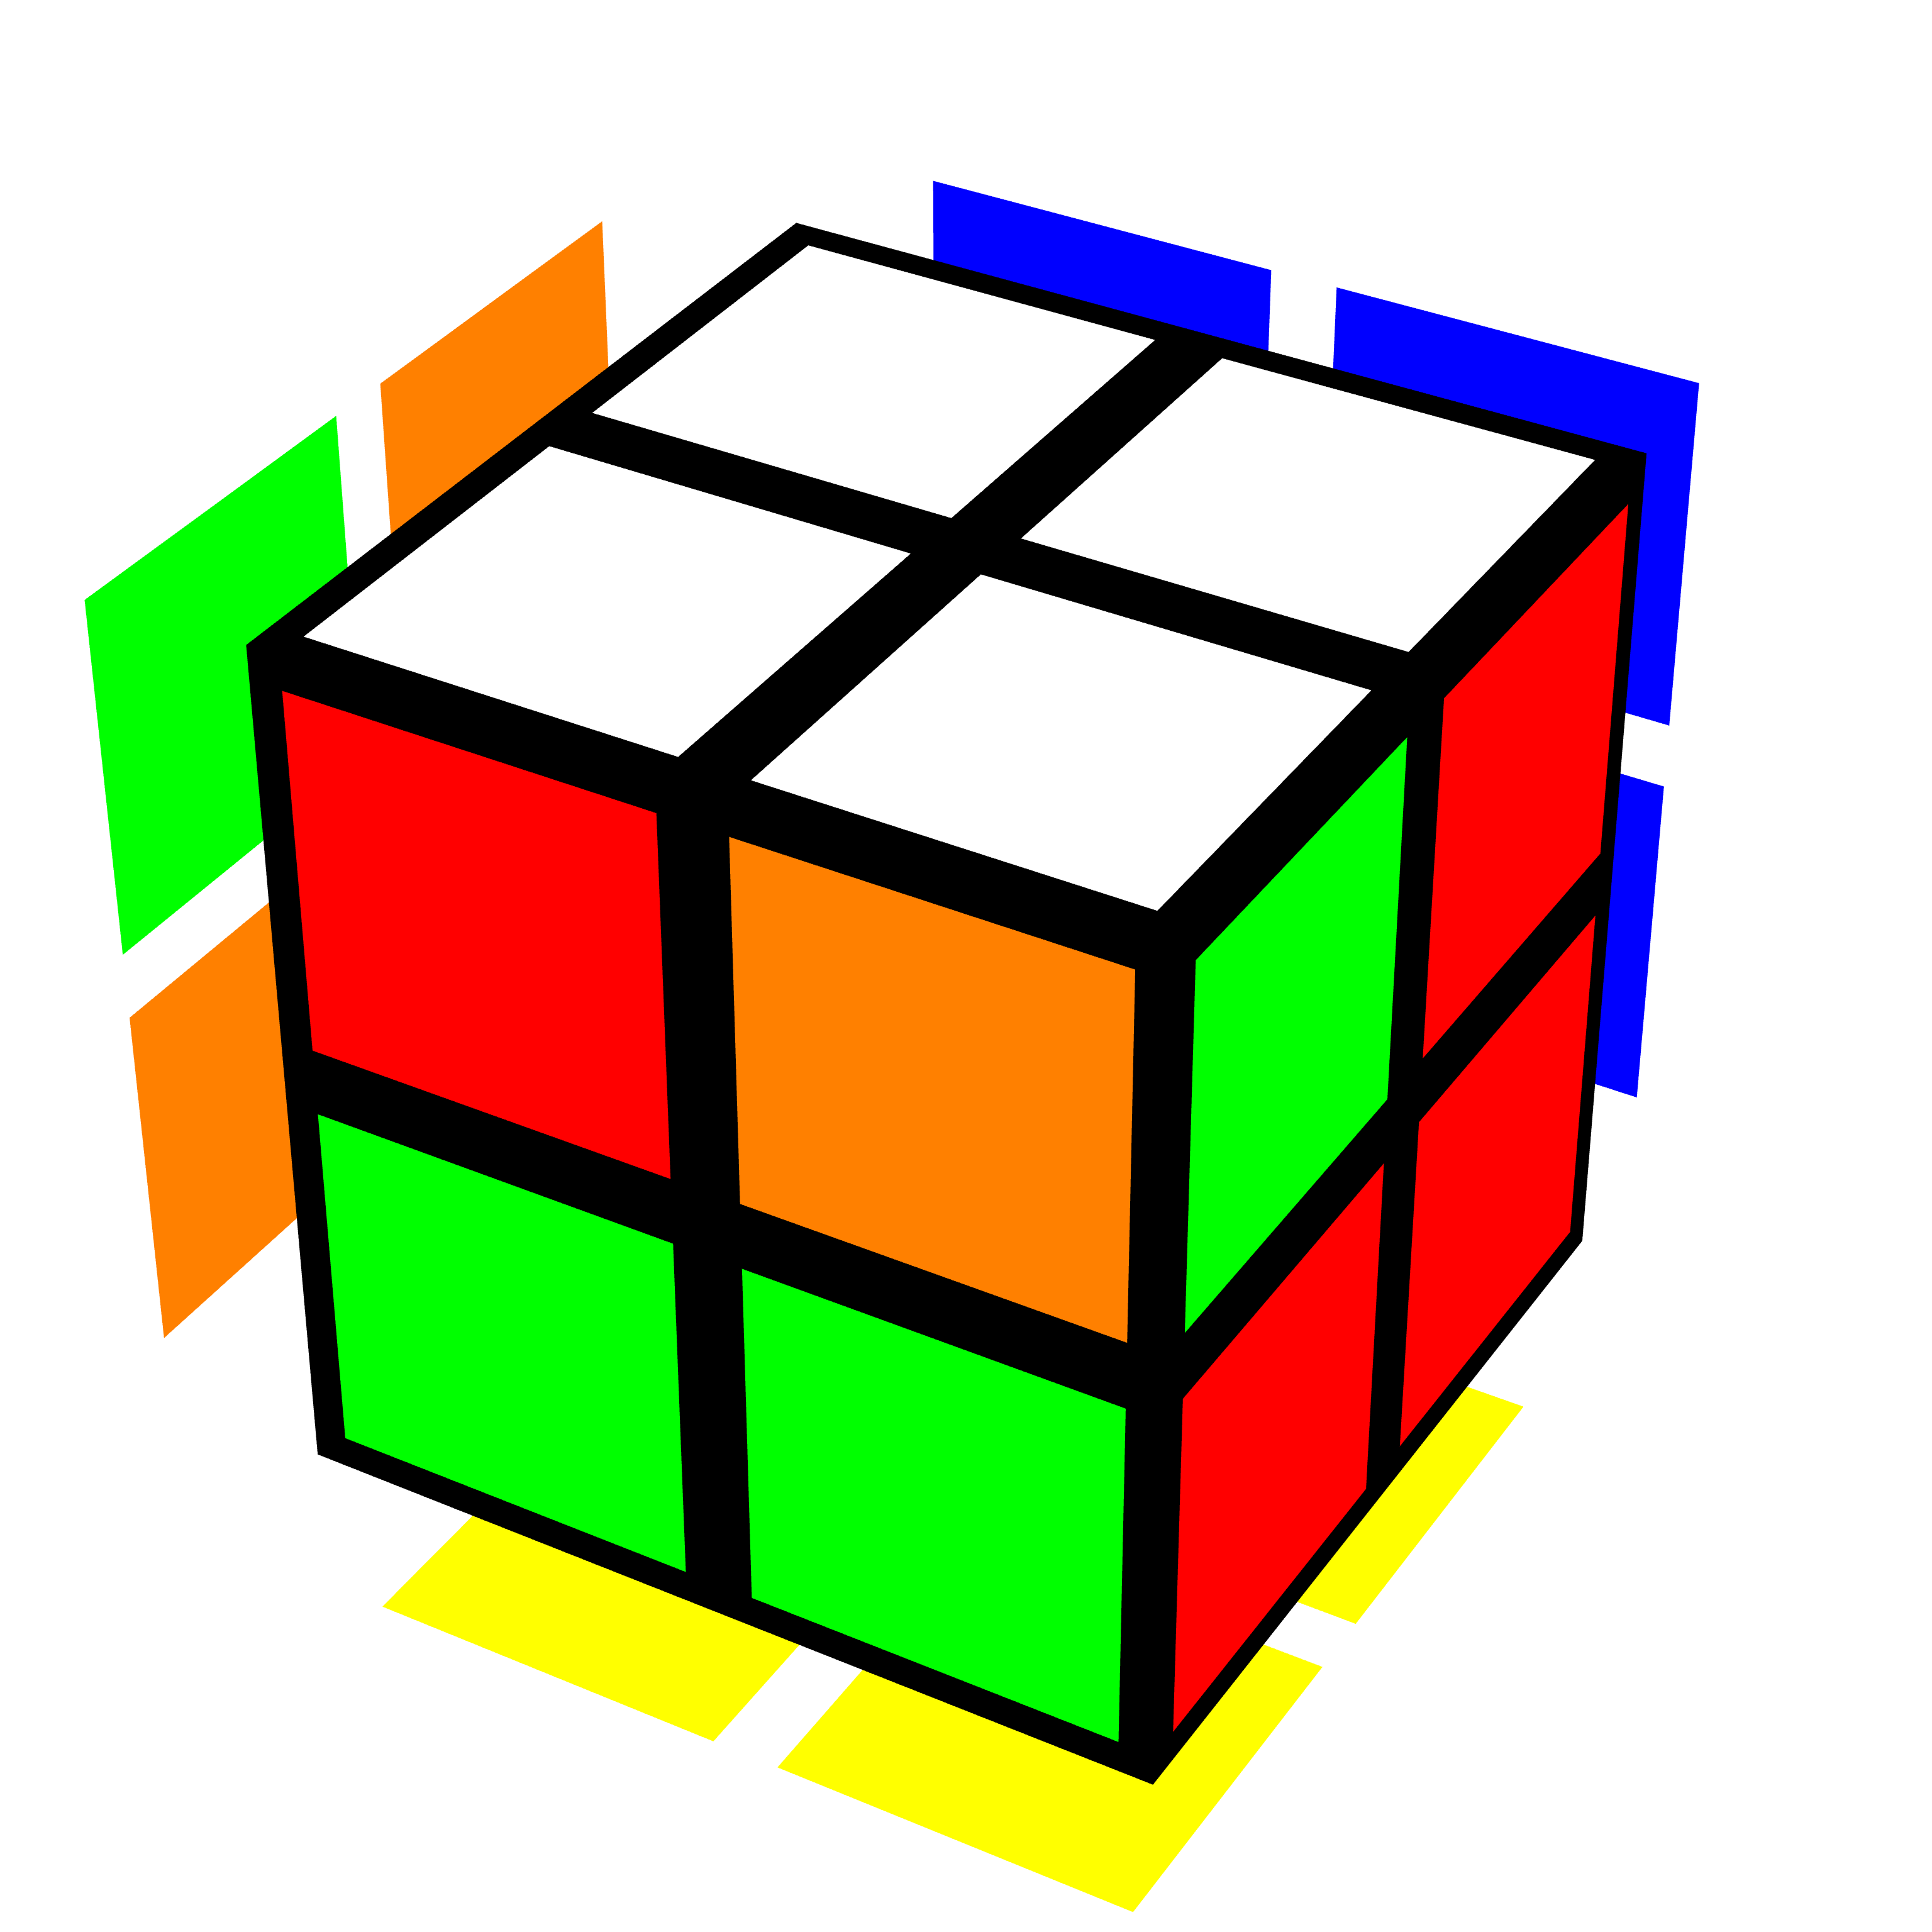 A 2x2x2 with two corner pieces swapped